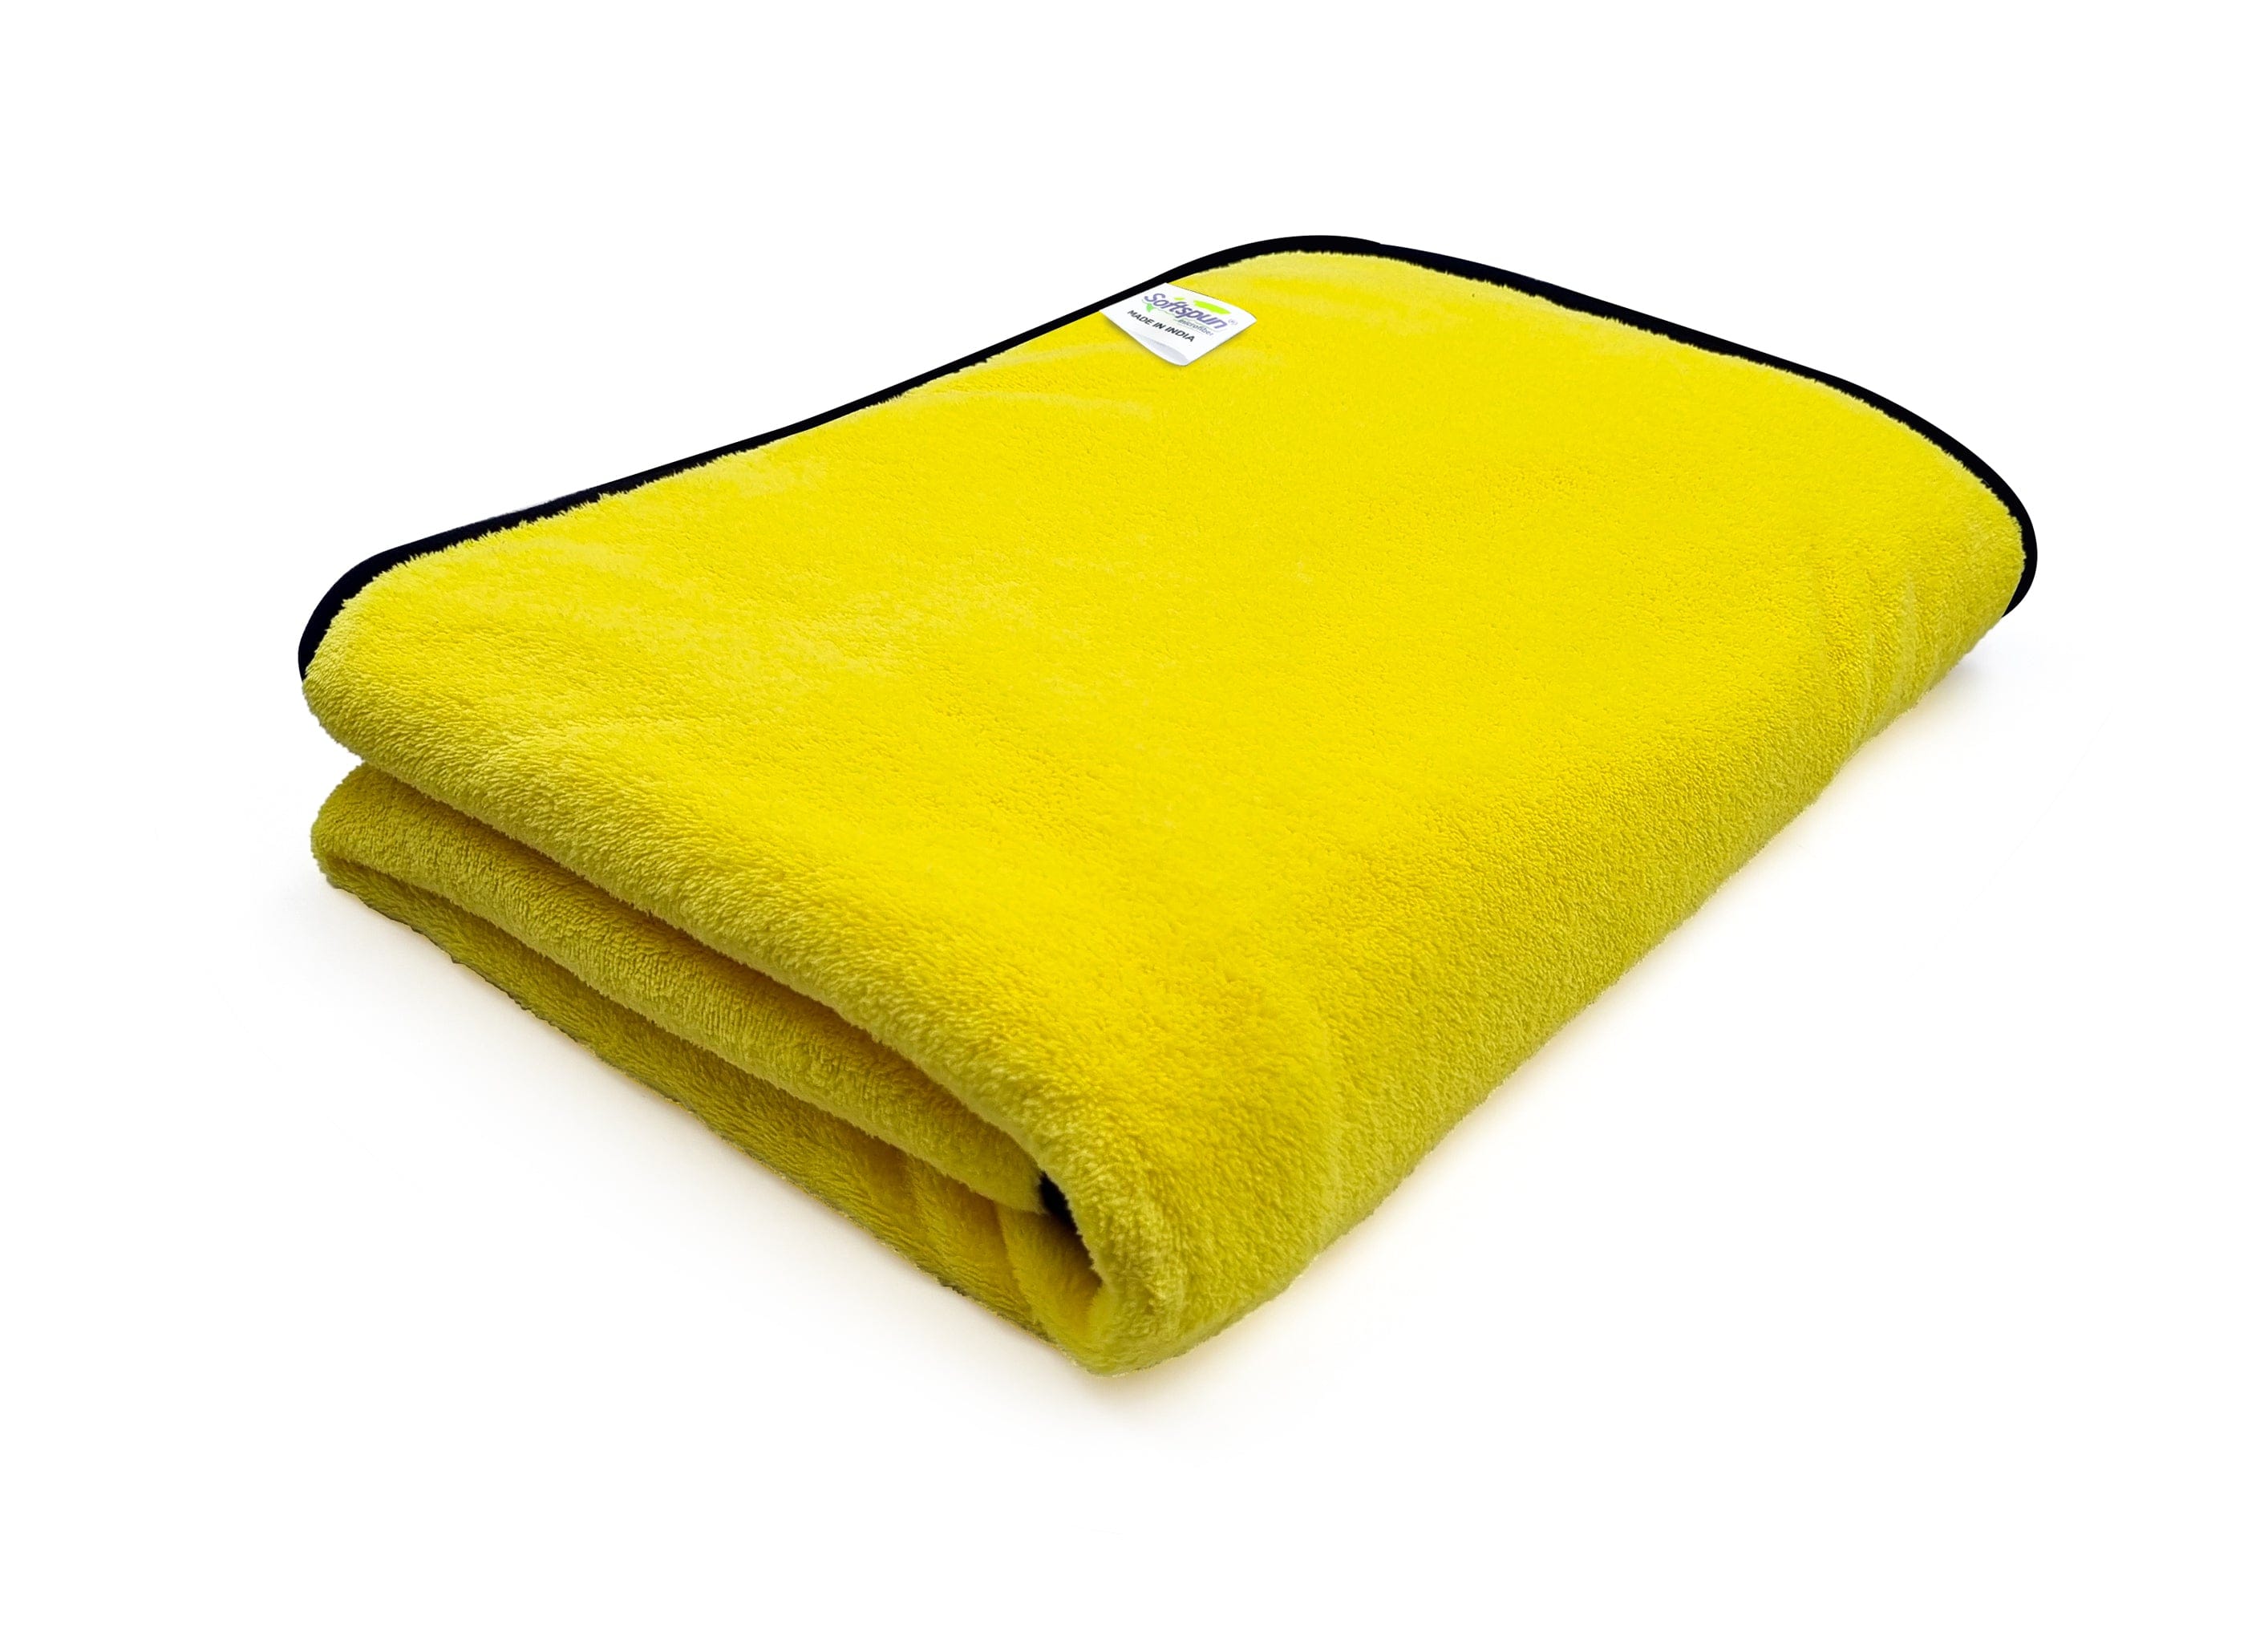 SOFTSPUN Microfiber Bath Towel 1 pc70140cm280 GSM , Ultra Absorbent Super Soft & Comfortable Quick Drying for Men & Women Daily Use Pack of 1 Extra Large Size Unisex.